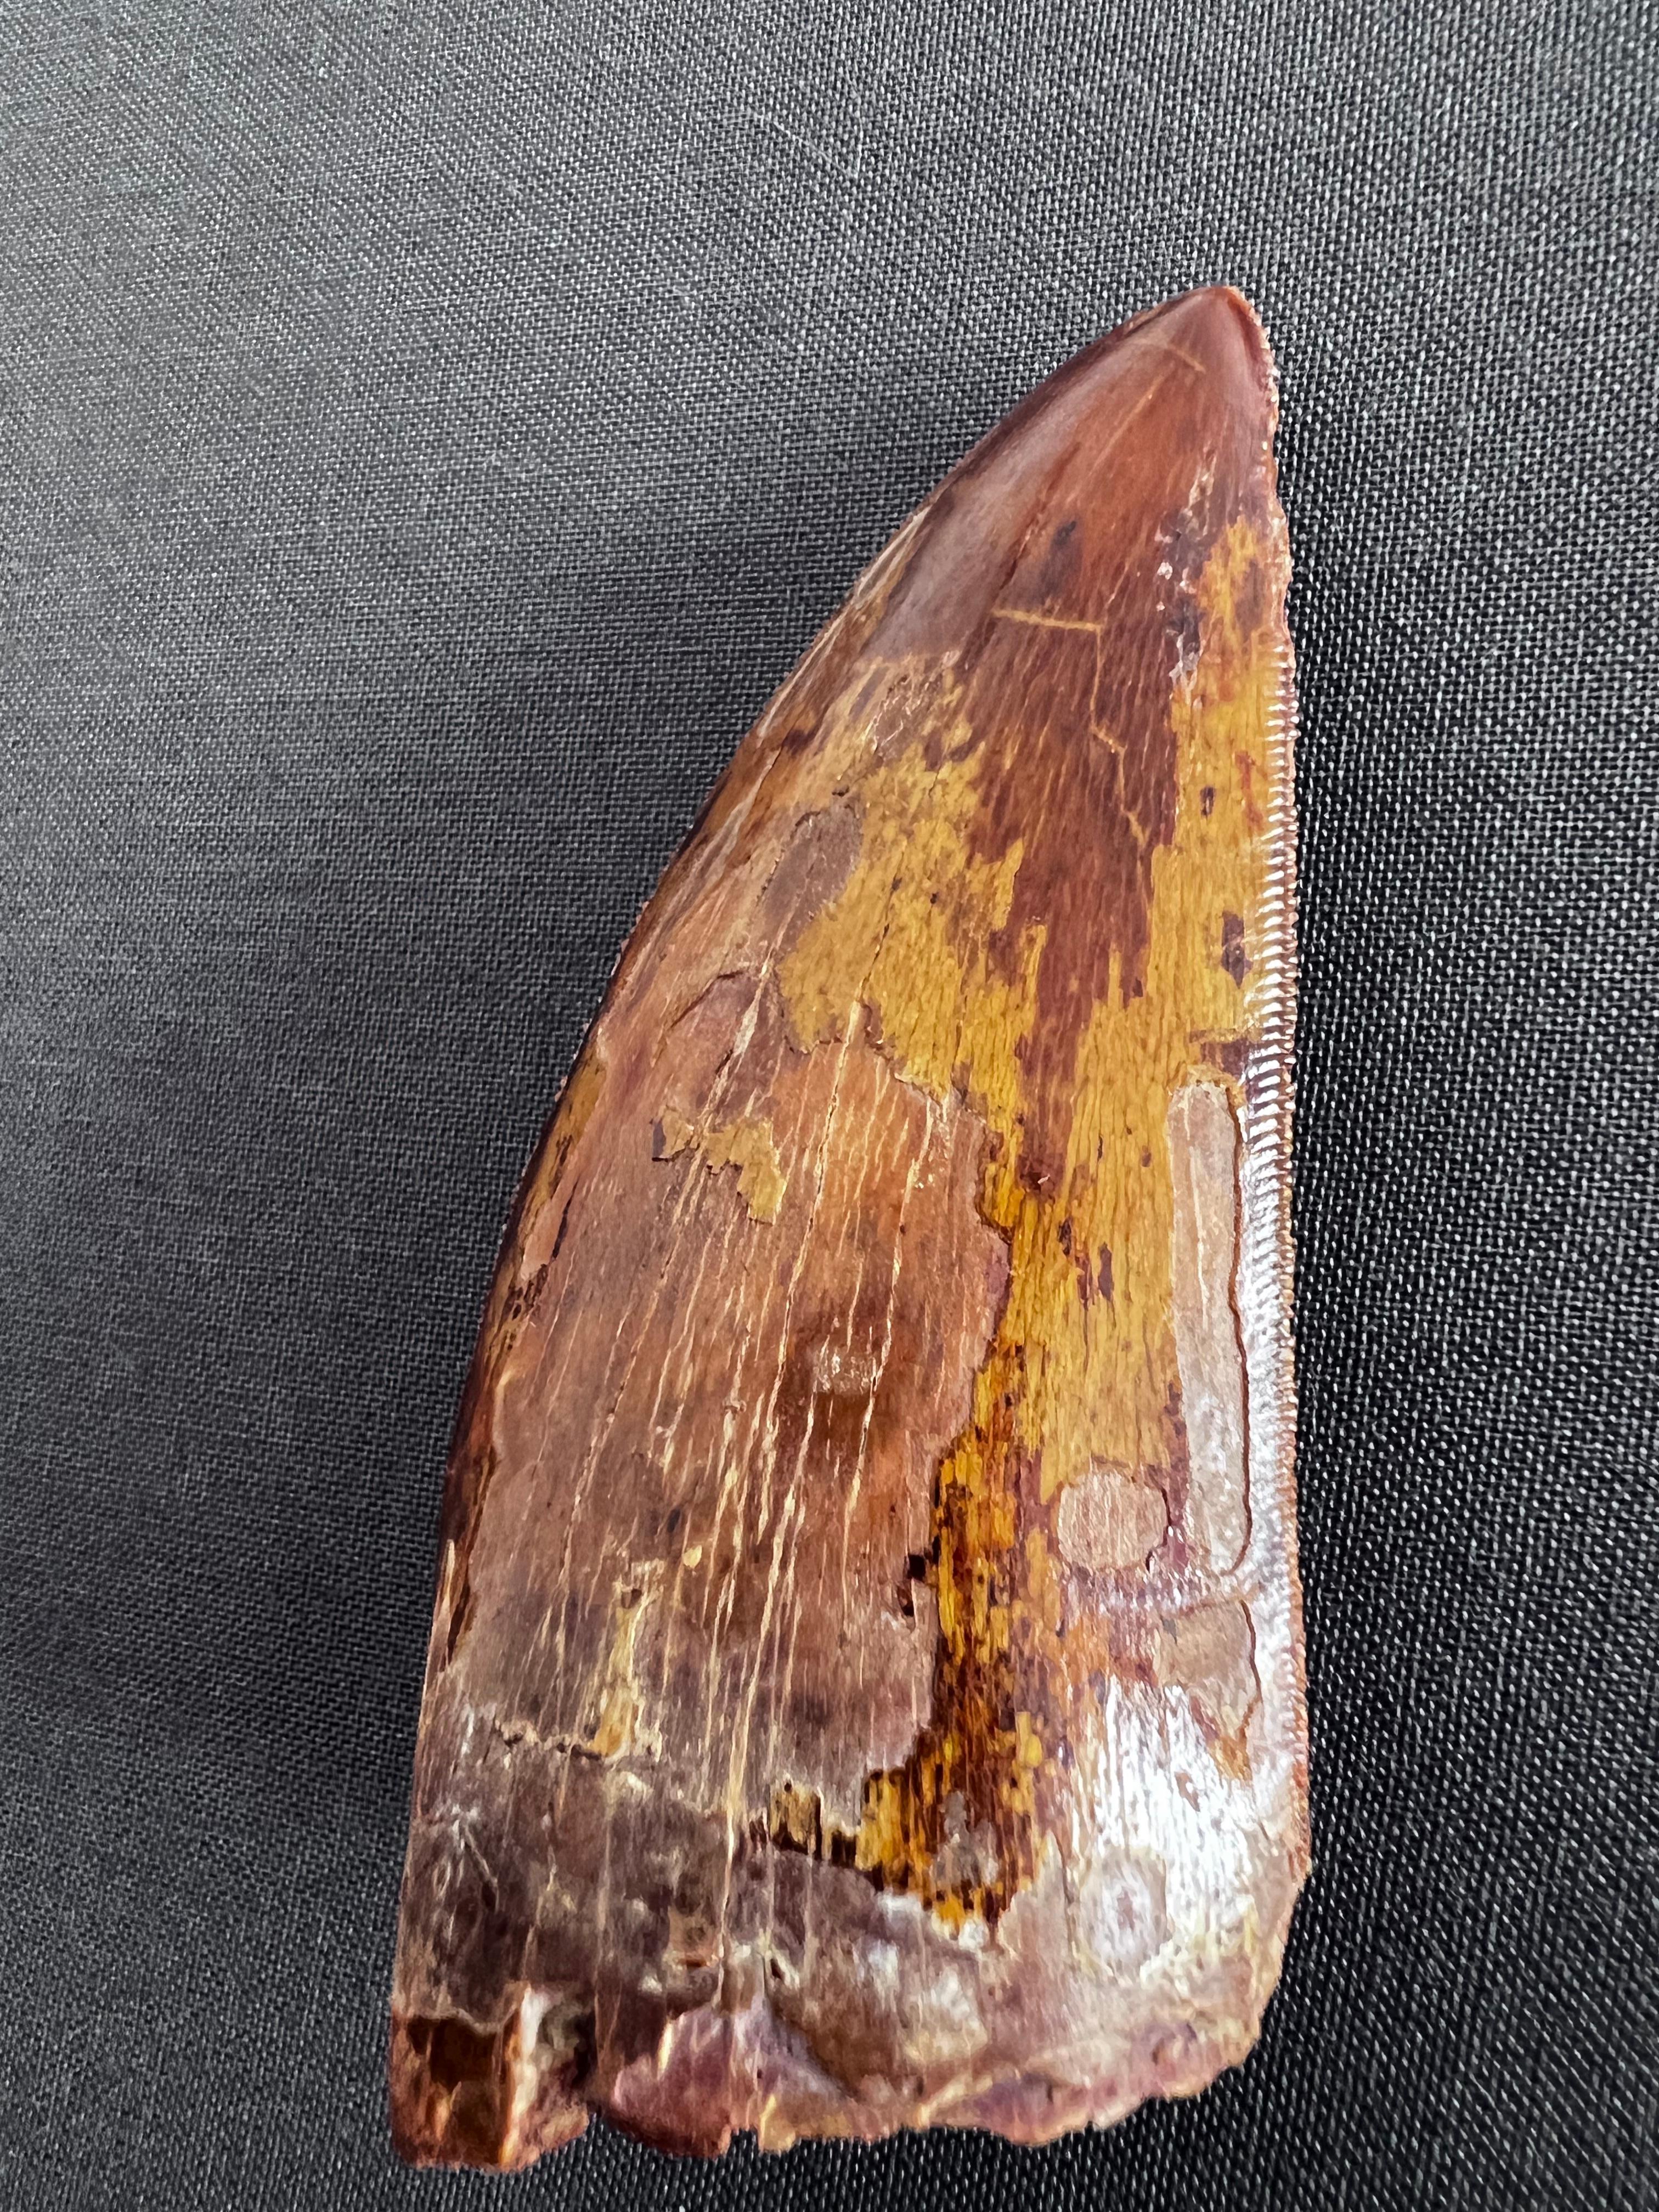 North African Selected Tooth of Carcharodontosaurus Dinosaur For Sale